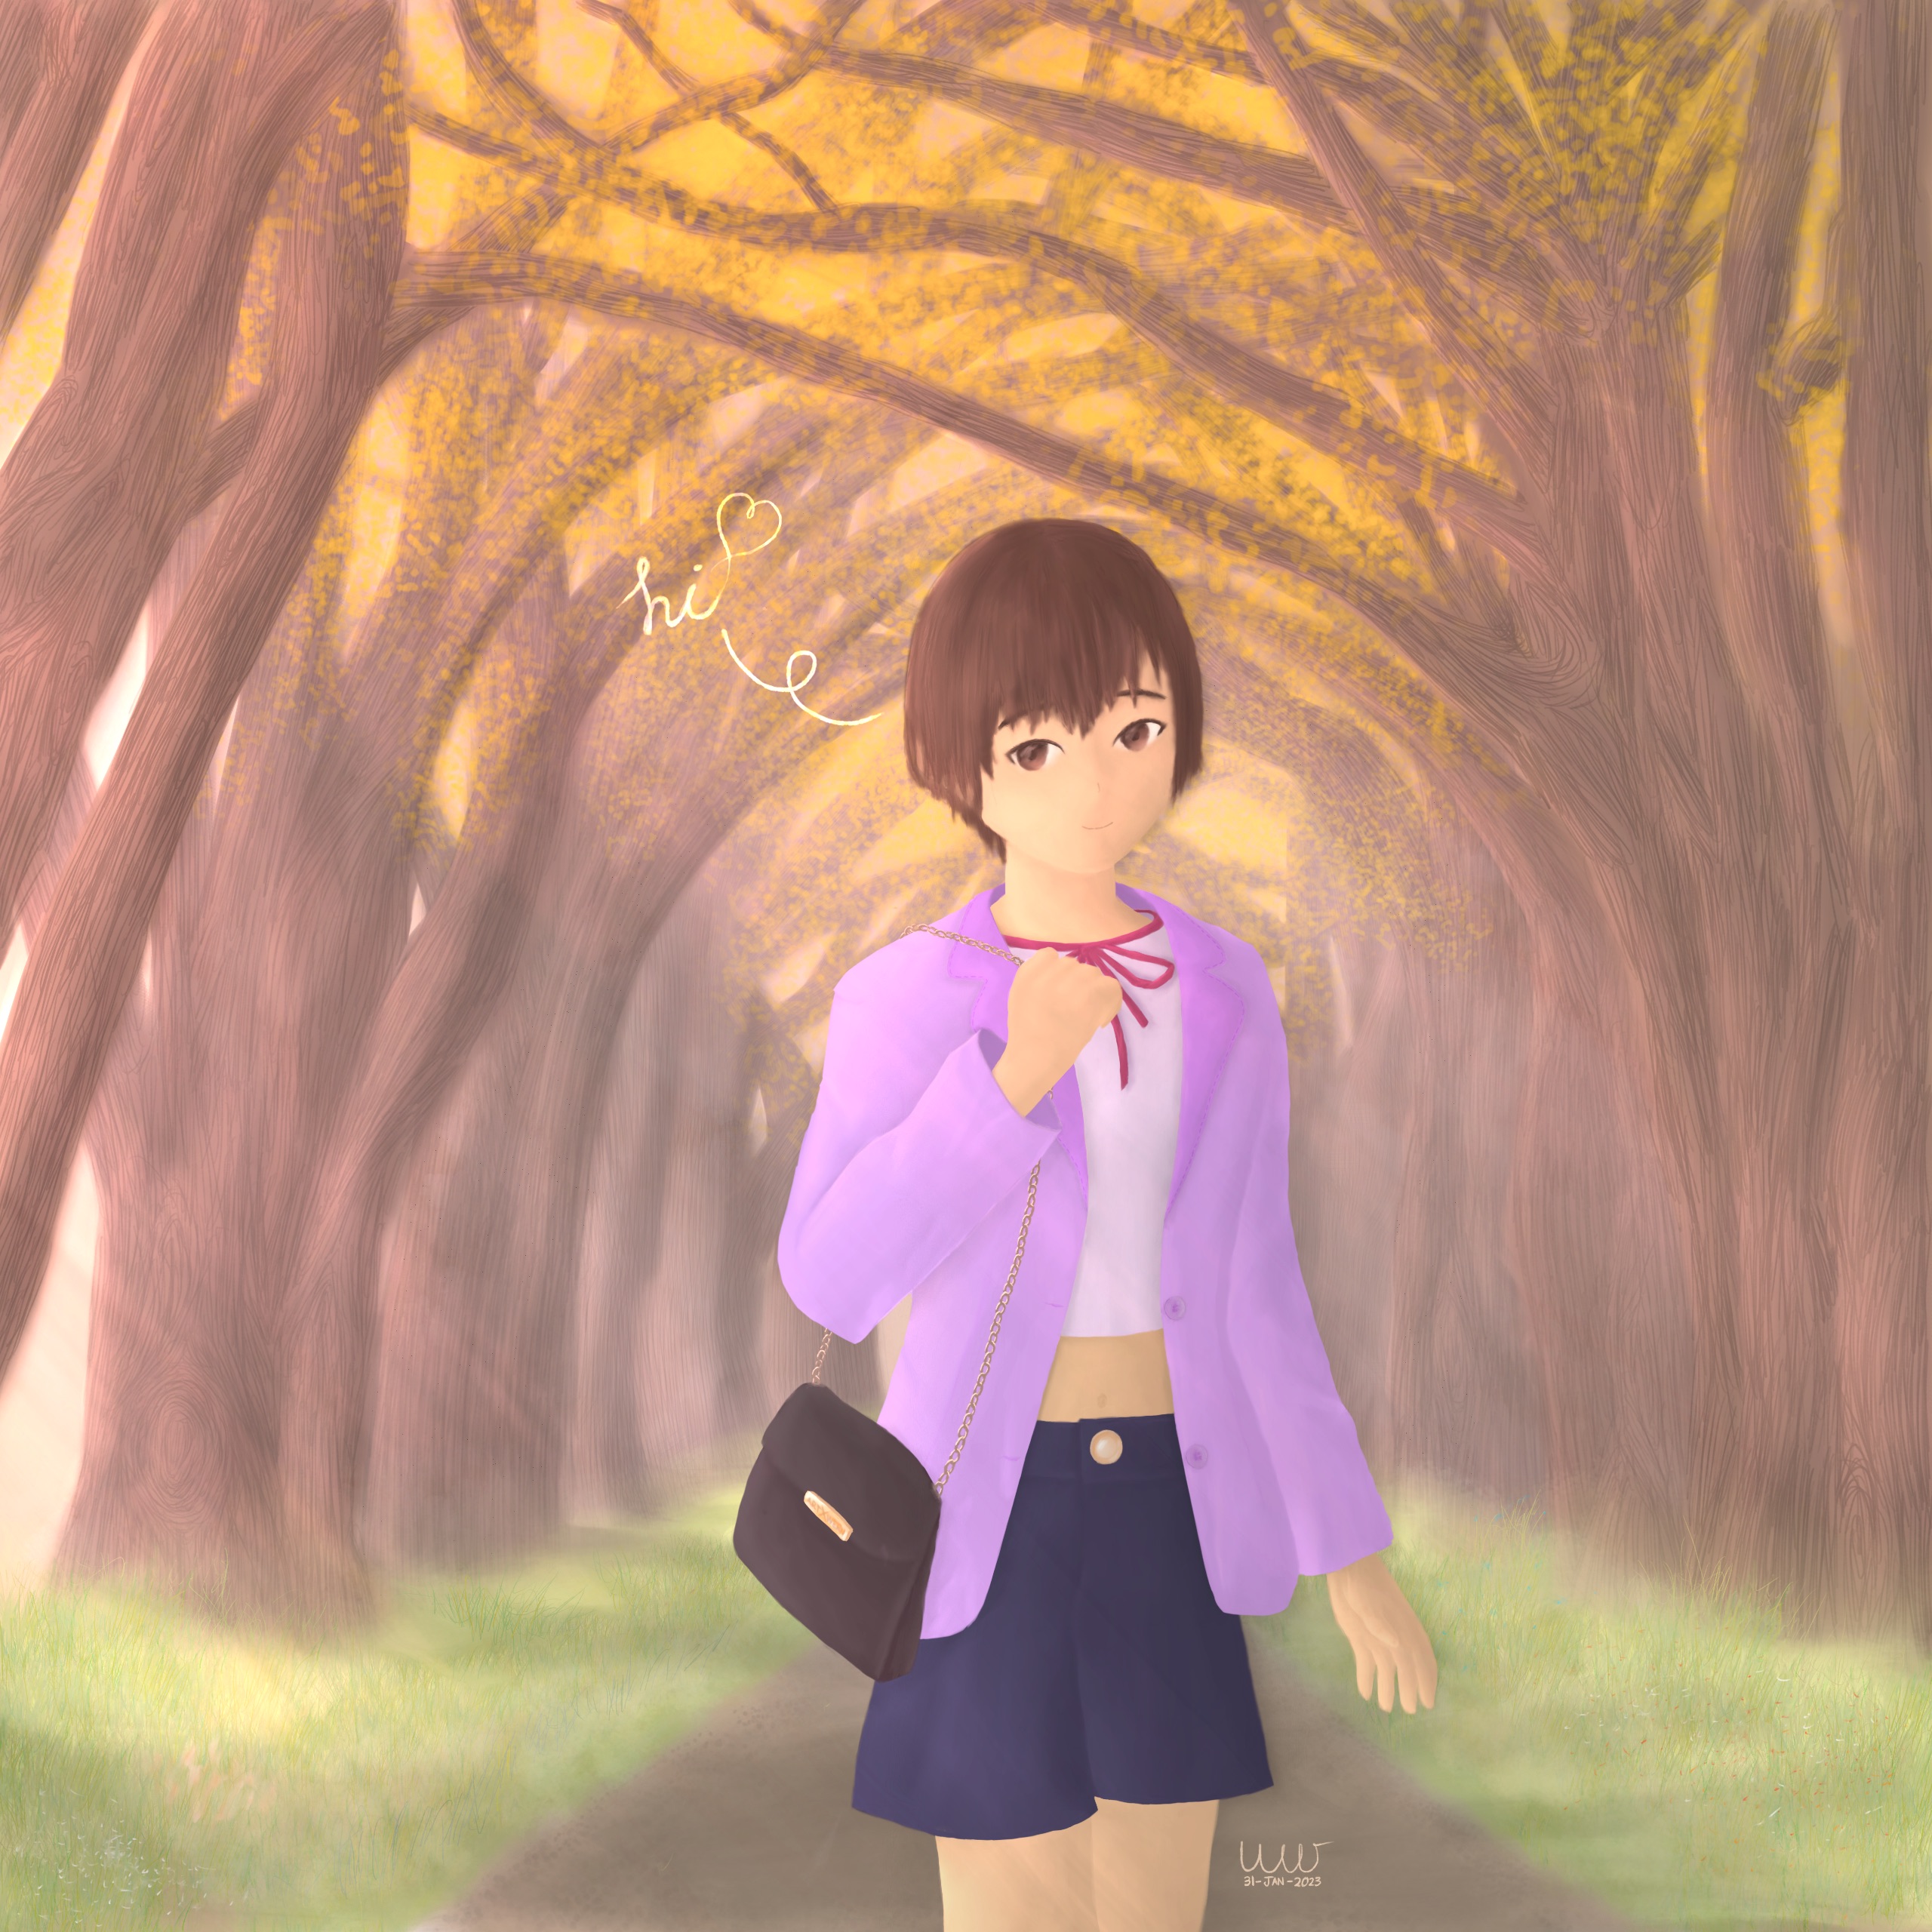 [Express Path - Artwork Image Description]: A character appears to be standing on a concrete path, facing the viewer, wearing a purple blazer over a crop-top, with dark flared shorts, and holding a black handbag with a gold chain. The path is a straight one, appearing to going all the way from the viewer to the horizon ahead. Tall trees can be seen arching from both sides of the path, having yellowing leaves on their branches and rooted on ground which has green vegetation. Sunlight flares can be seen shining in from between the gaps from the top left to bottom right.